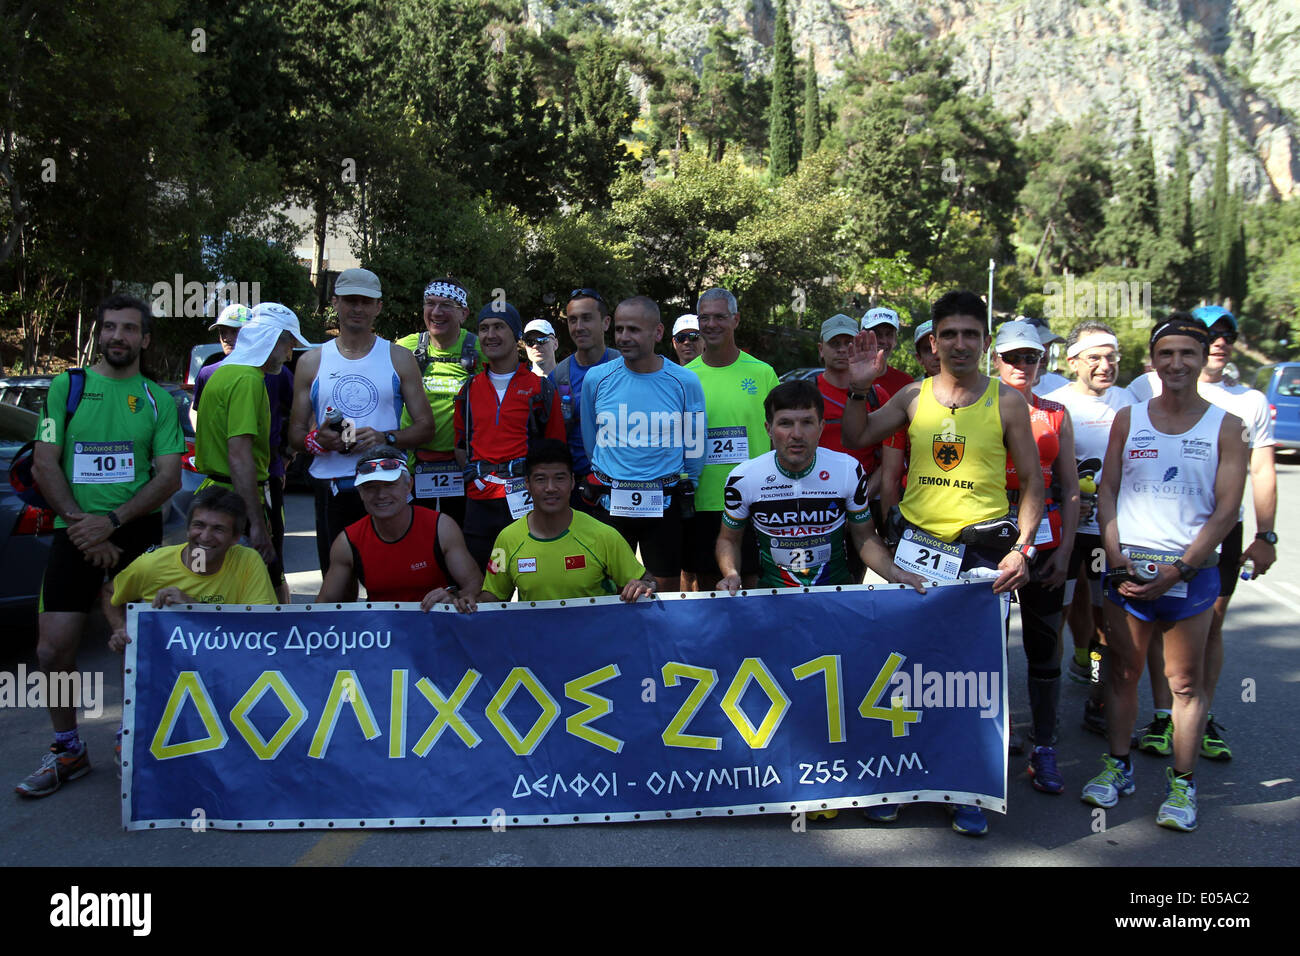 Athens. 2nd May, 2014. Participants in the 3rd Dolichos Ultra Marathon race pose for photograph at the starting point in front of the archaeological site of Delphi in central Greece on May 2, 2014. A total of 26 athletes, among them a Chinese, aim to run nonstop to Sunday afternoon the 255 kilometers course to Olympia, the birthplace of the Olympic Games. © Marios Lolos/Xinhua/Alamy Live News Stock Photo